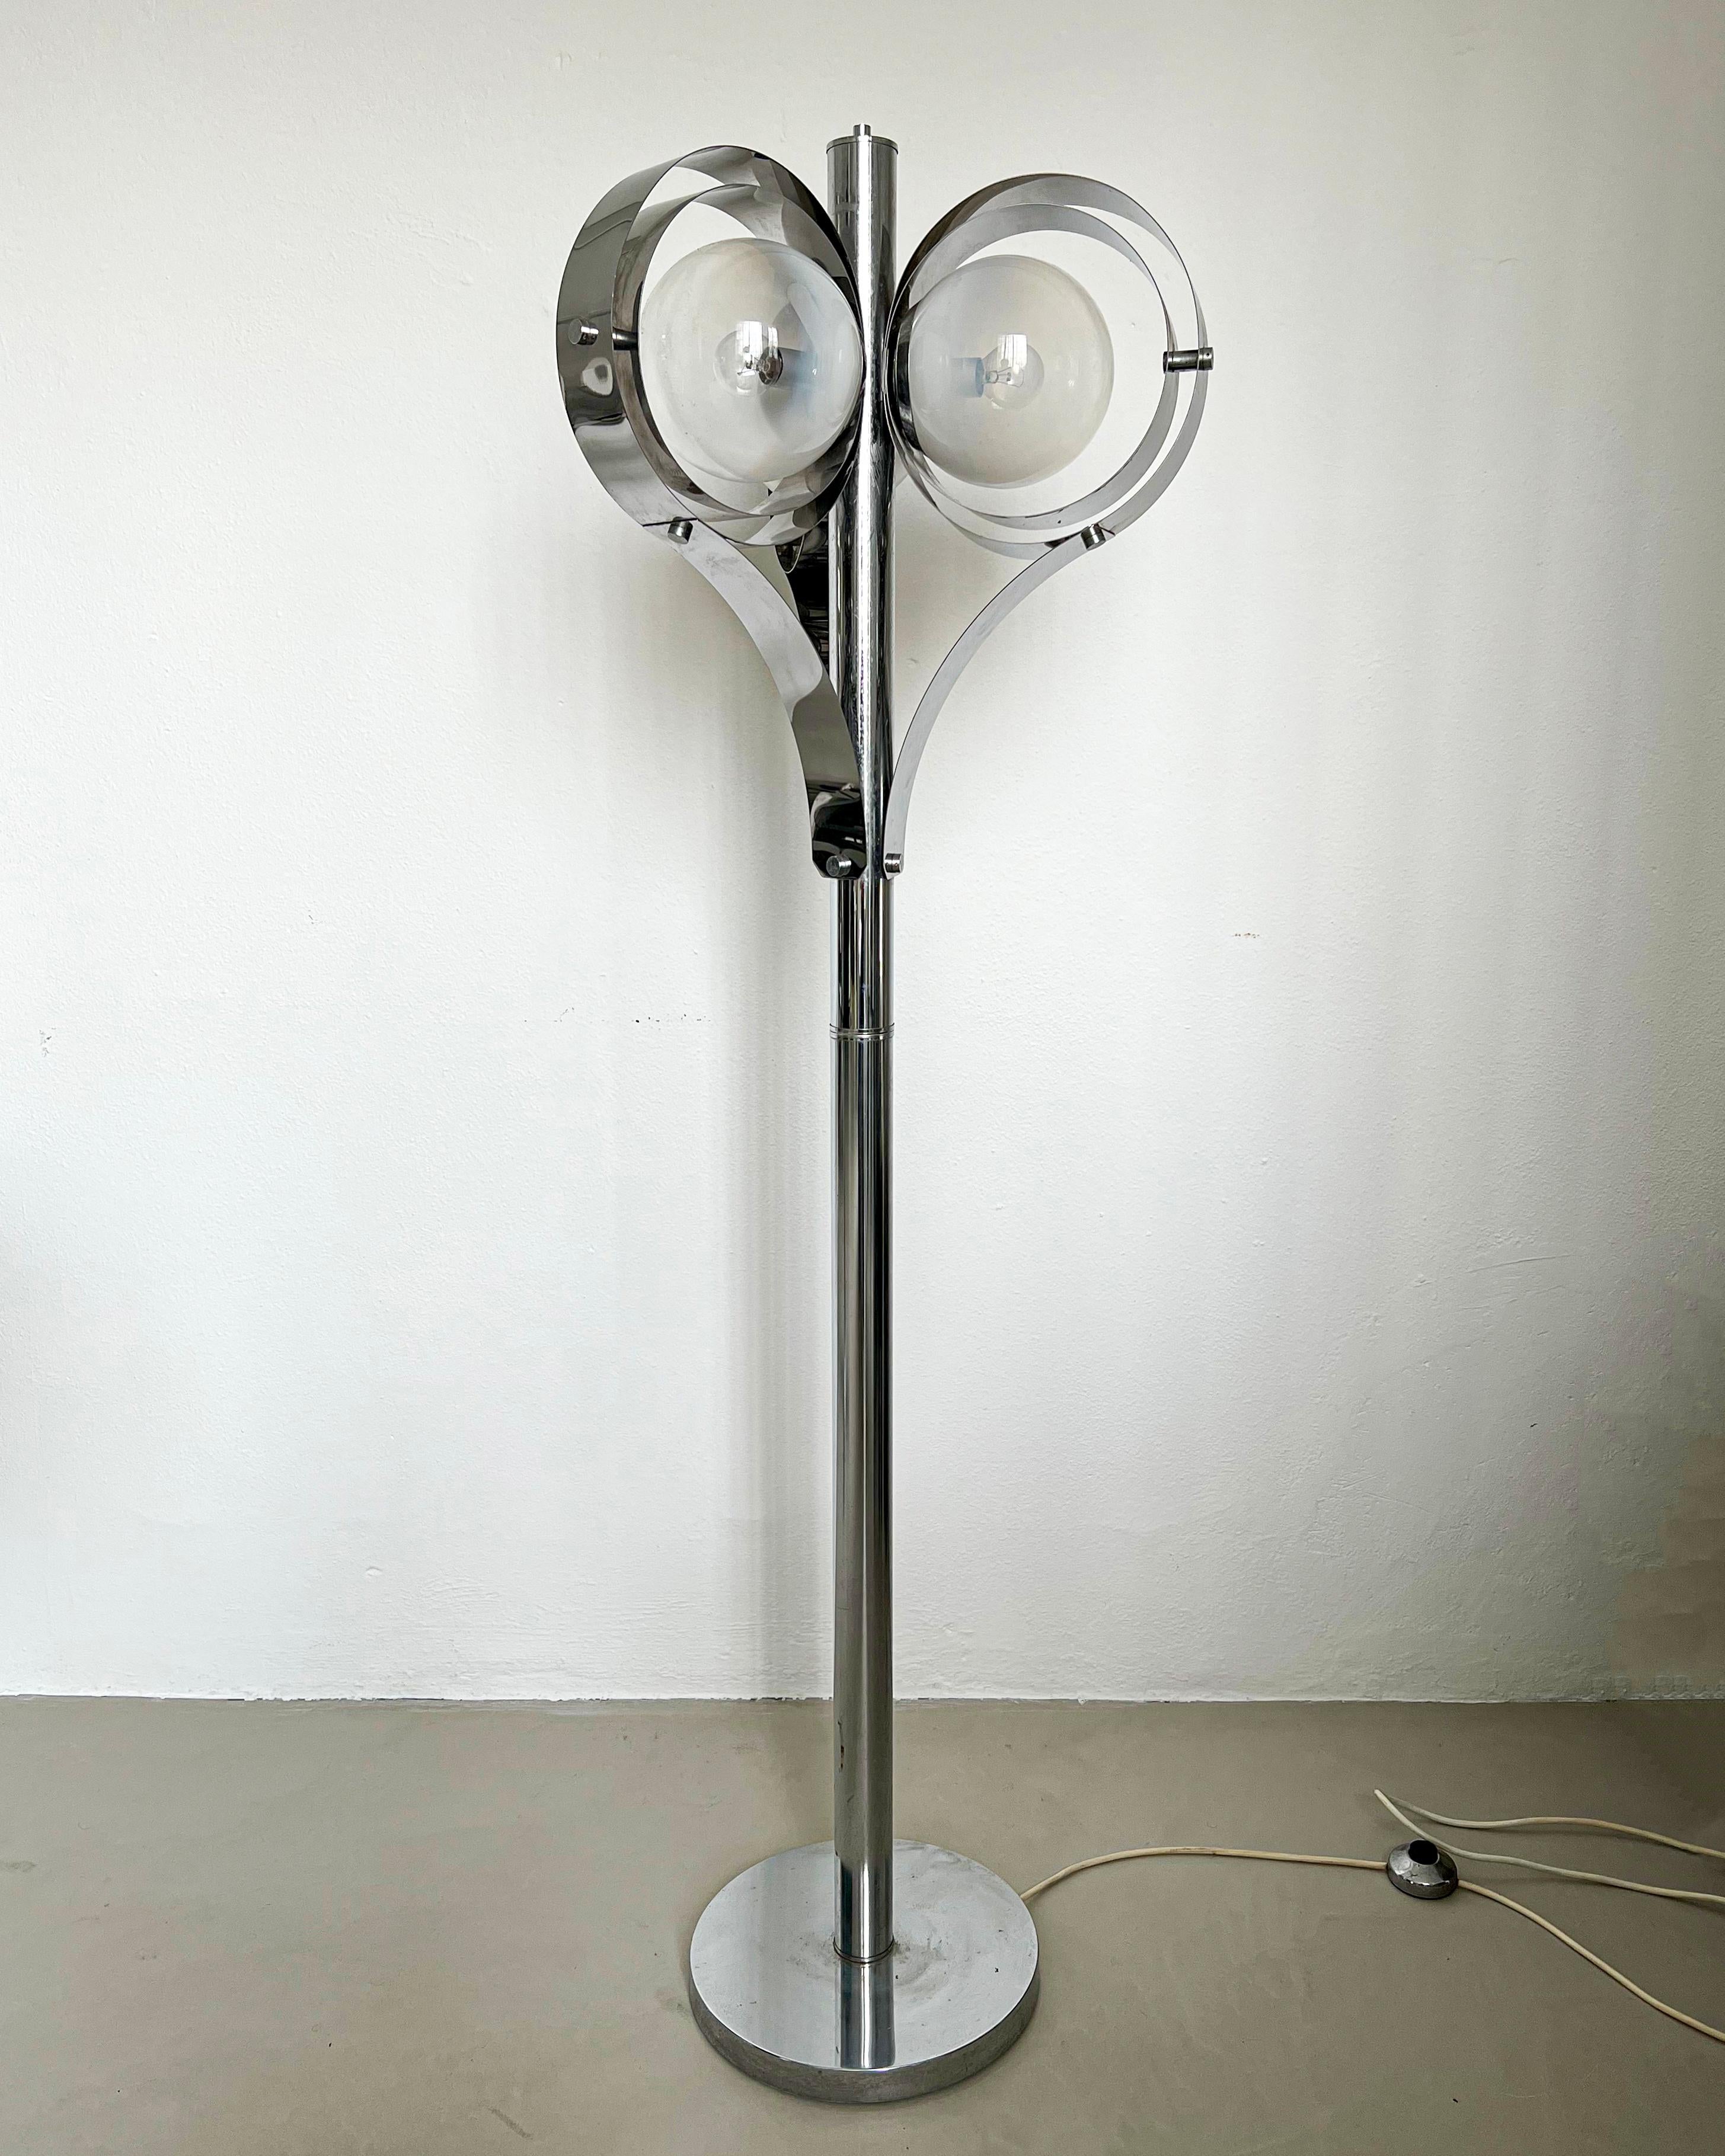 Chromed floor lamp - Space Age metal lamp - Decorative floor lamp

An unusual, highly decorative and well preserved floor lamp from the Seventies. In chromed metal, with three lights covered by glass globes and revolving metal ribbons around